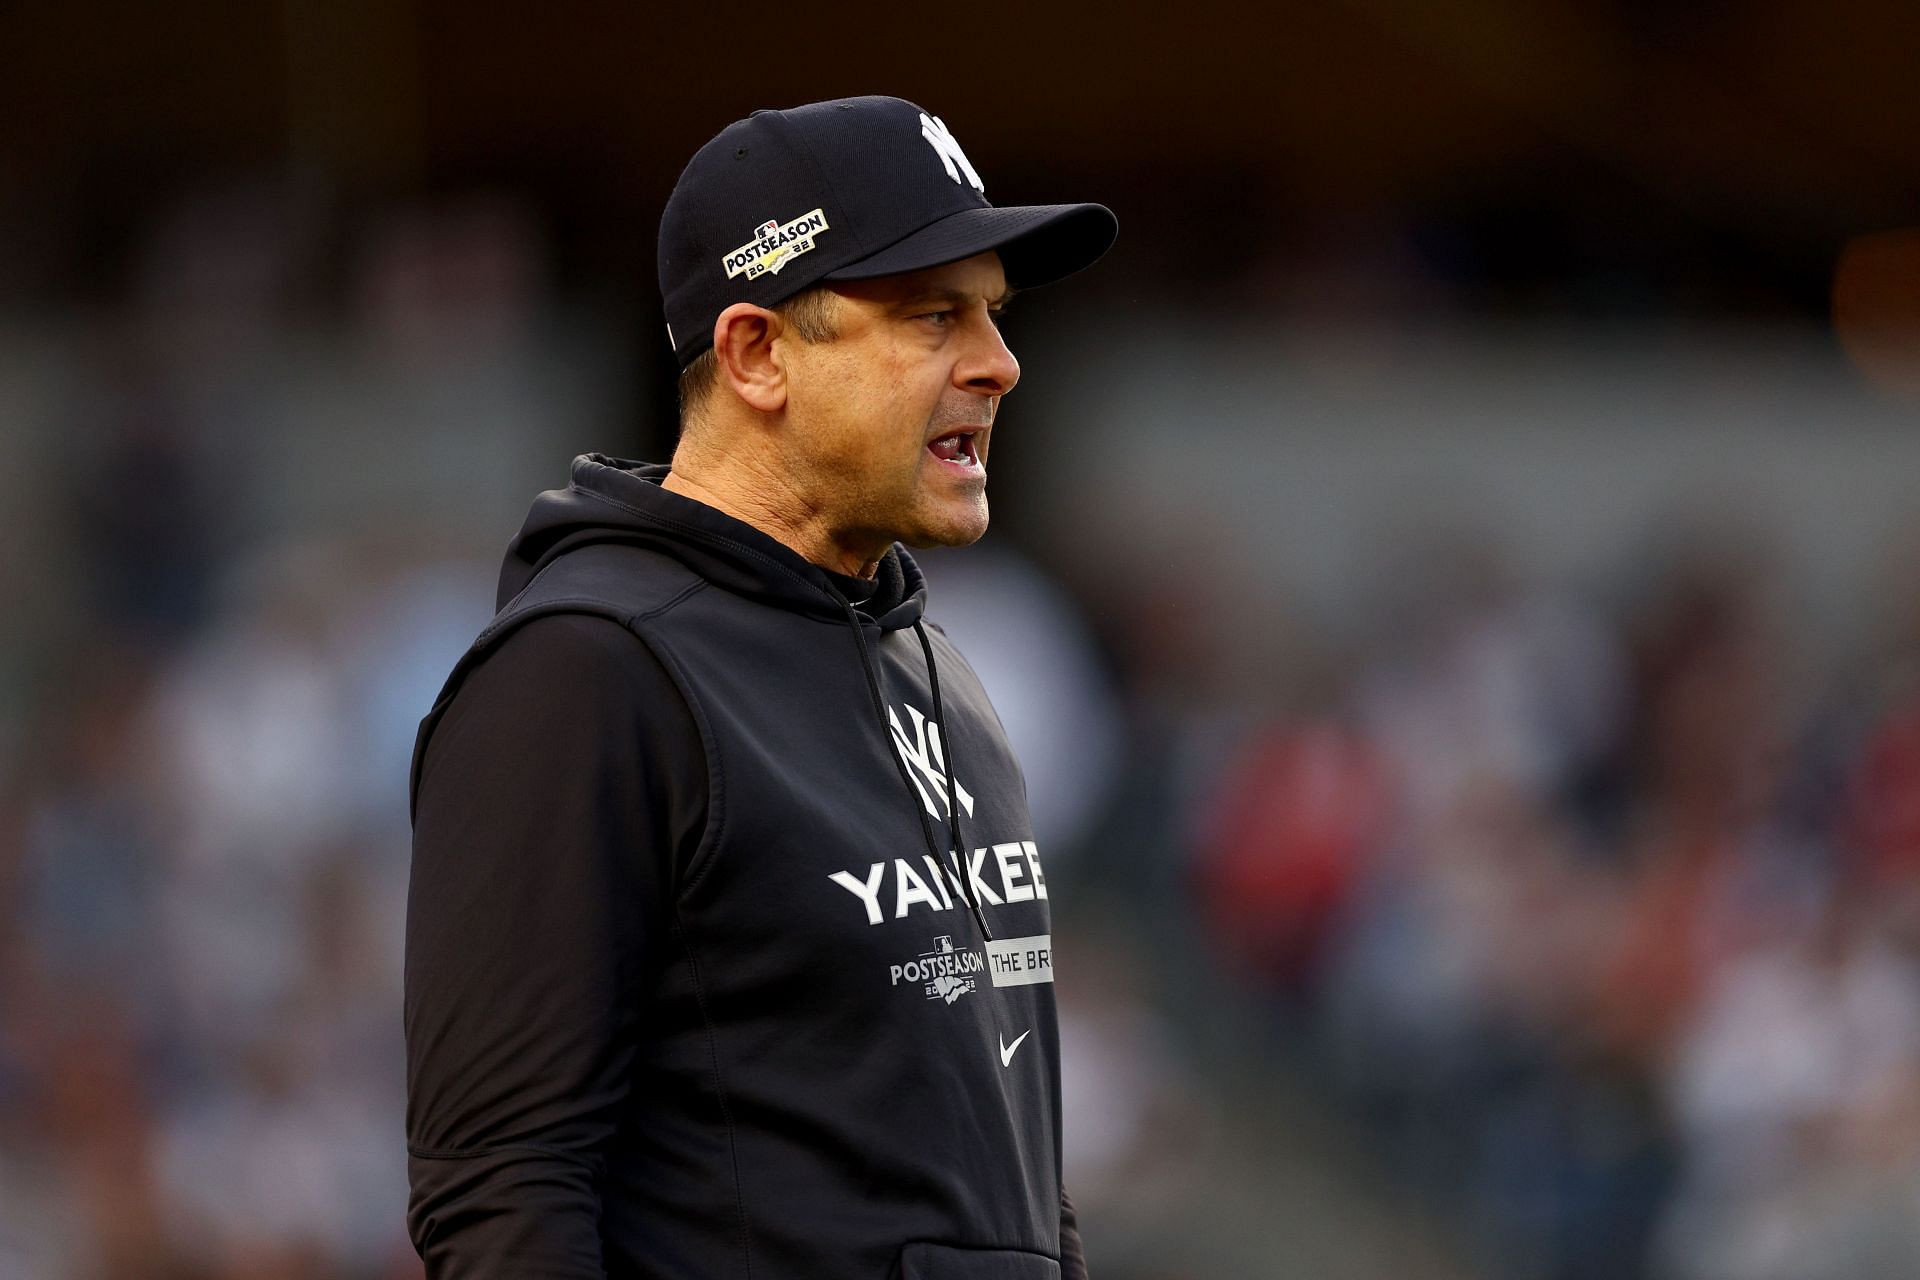 Manager Aaron Boone #17 of the New York Yankees reacts against the Houston Astros during the second inning in game three of the American League Championship Series at Yankee Stadium on October 22, 2022 in New York City.